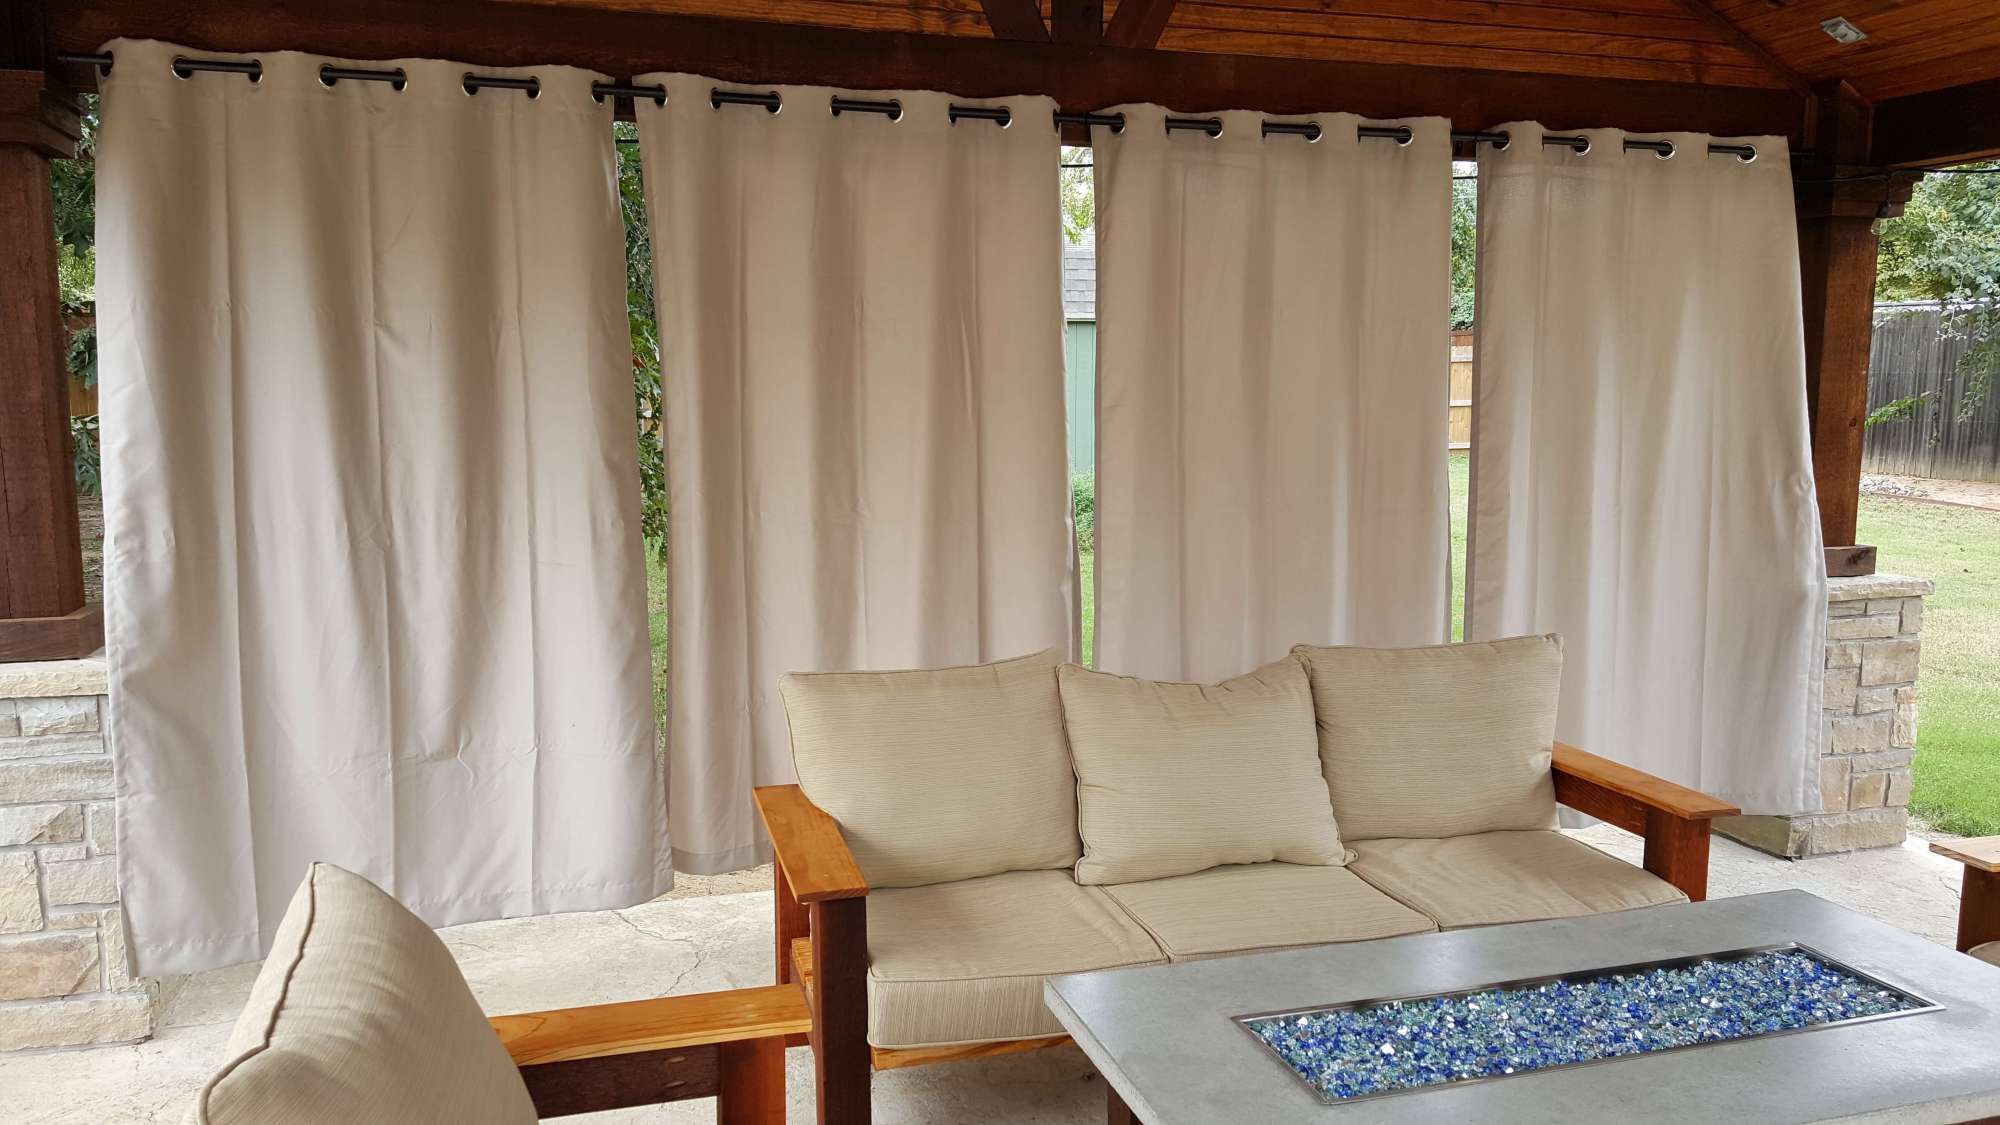 How To Build Outdoor Patio Curtains